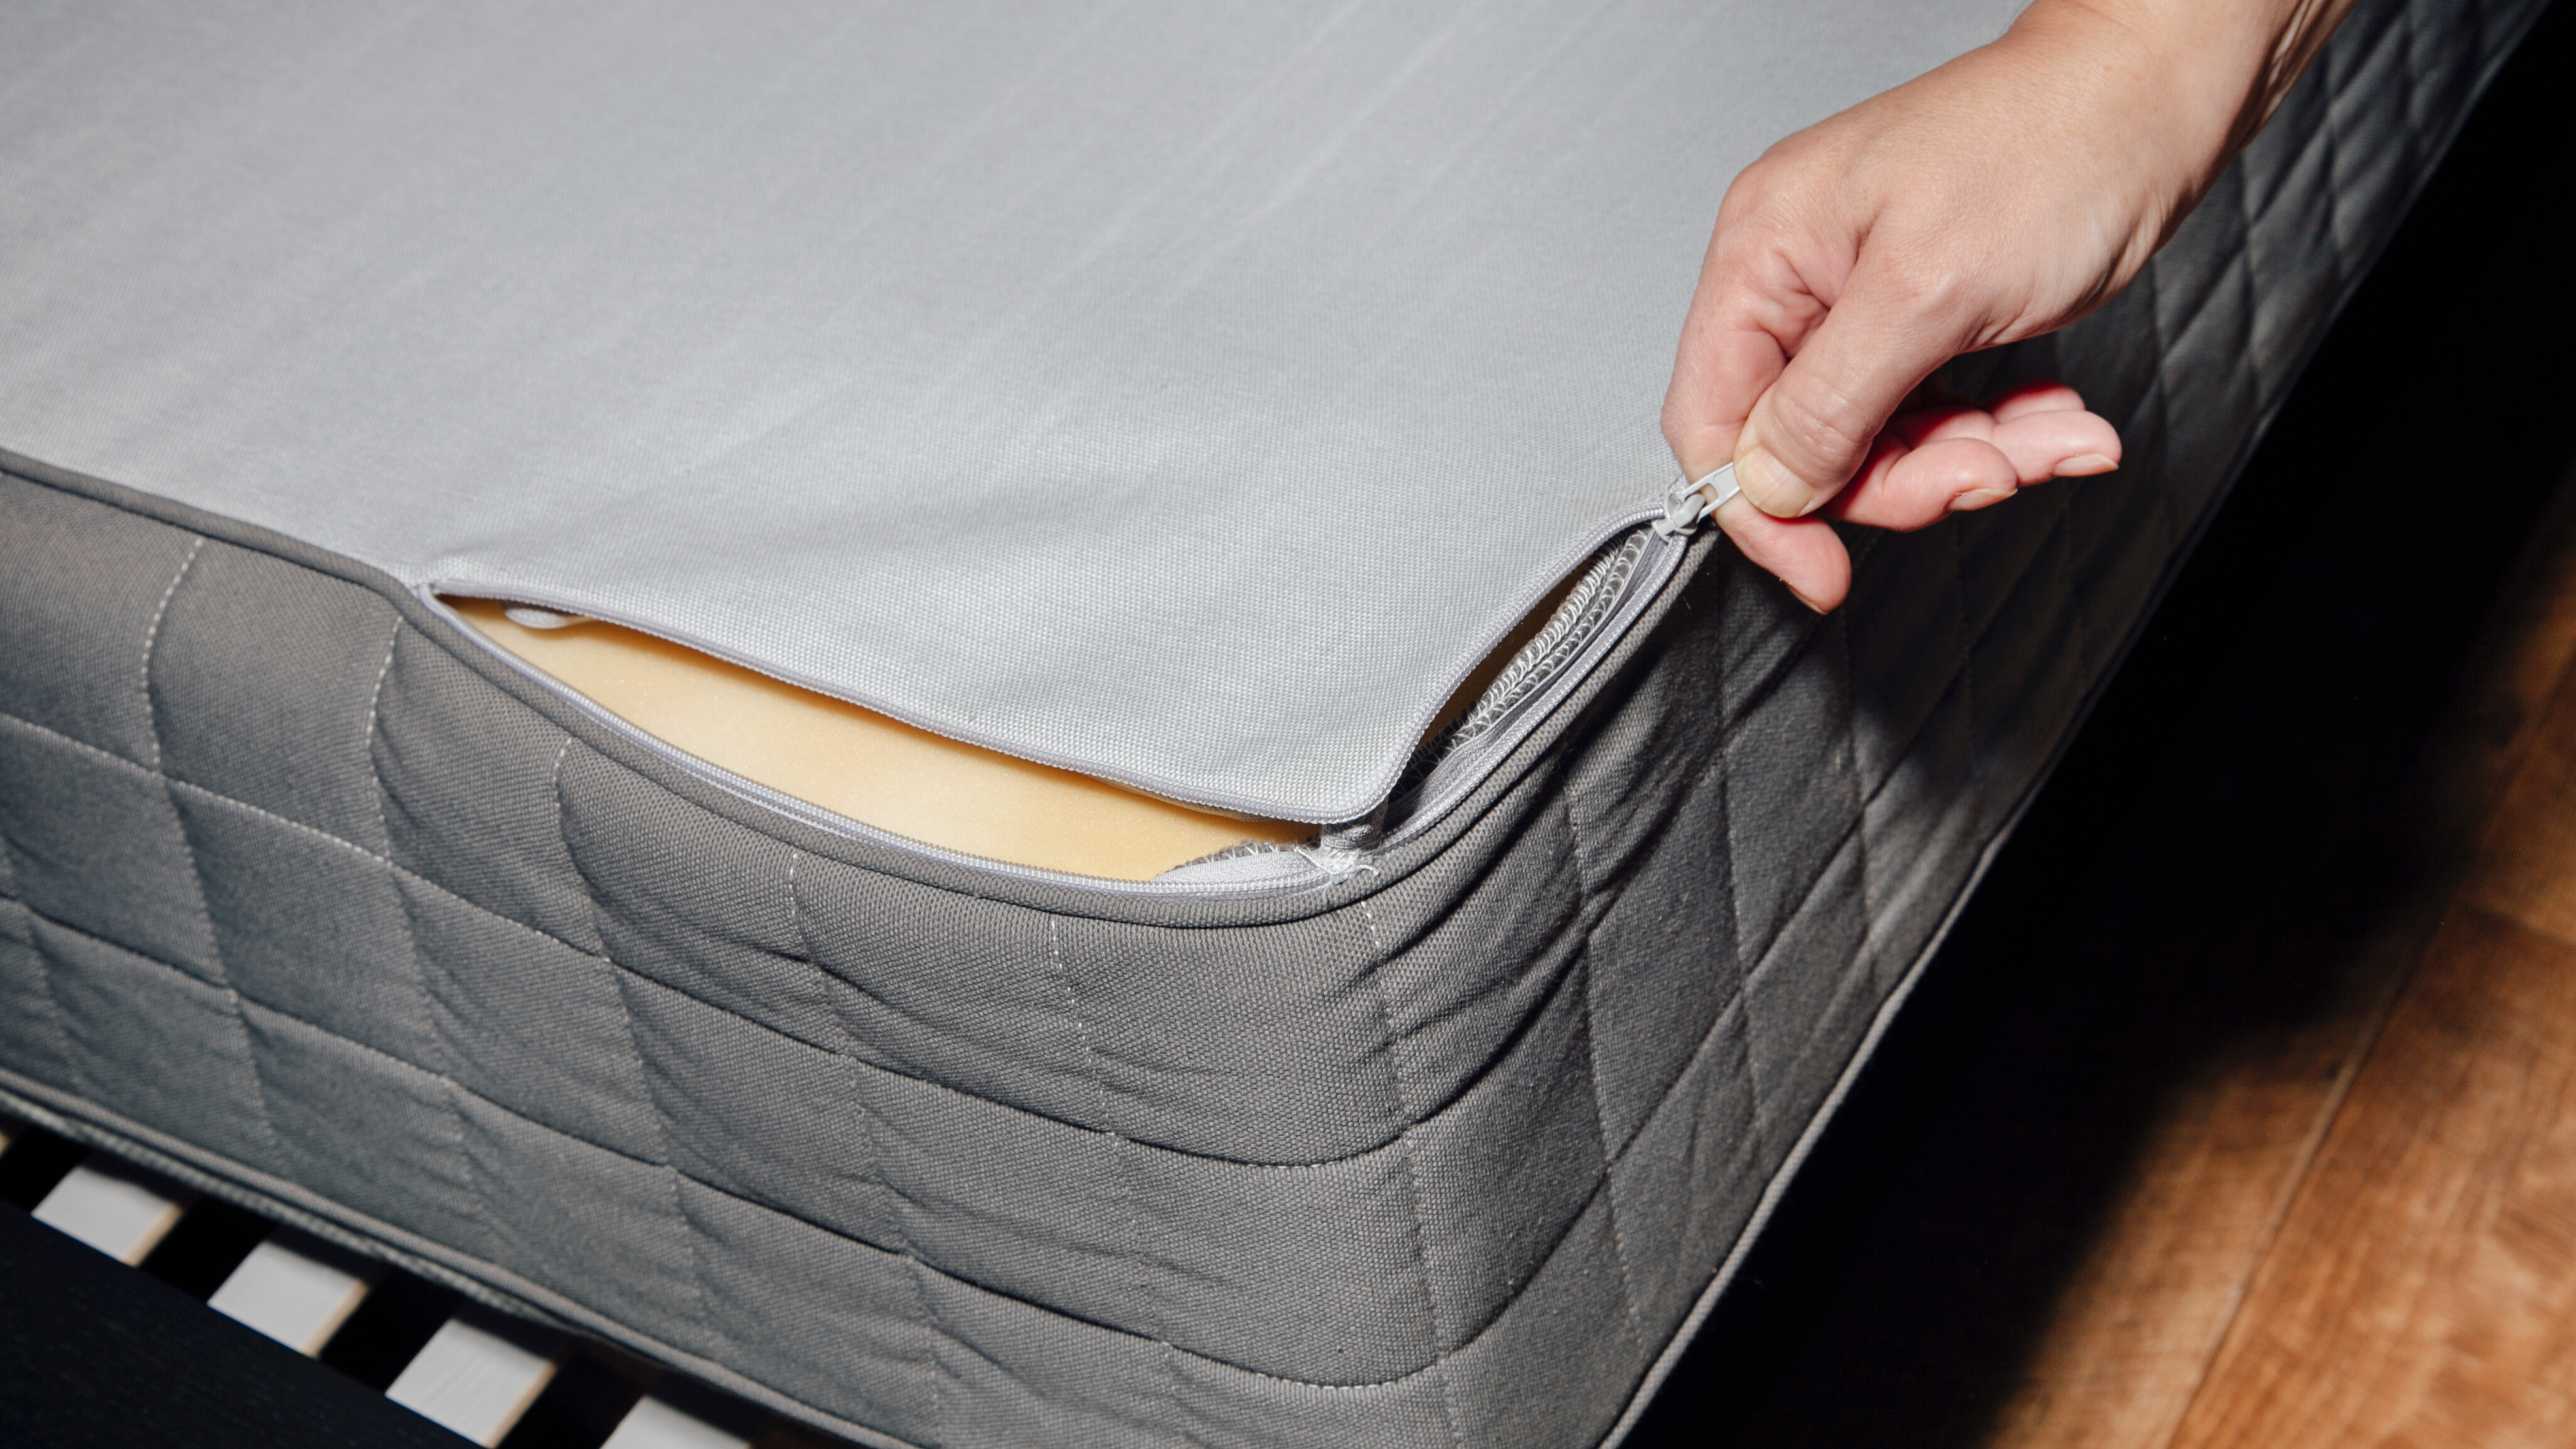 If fiberglass is dangerous, why is it used in some mattresses? We asked ...